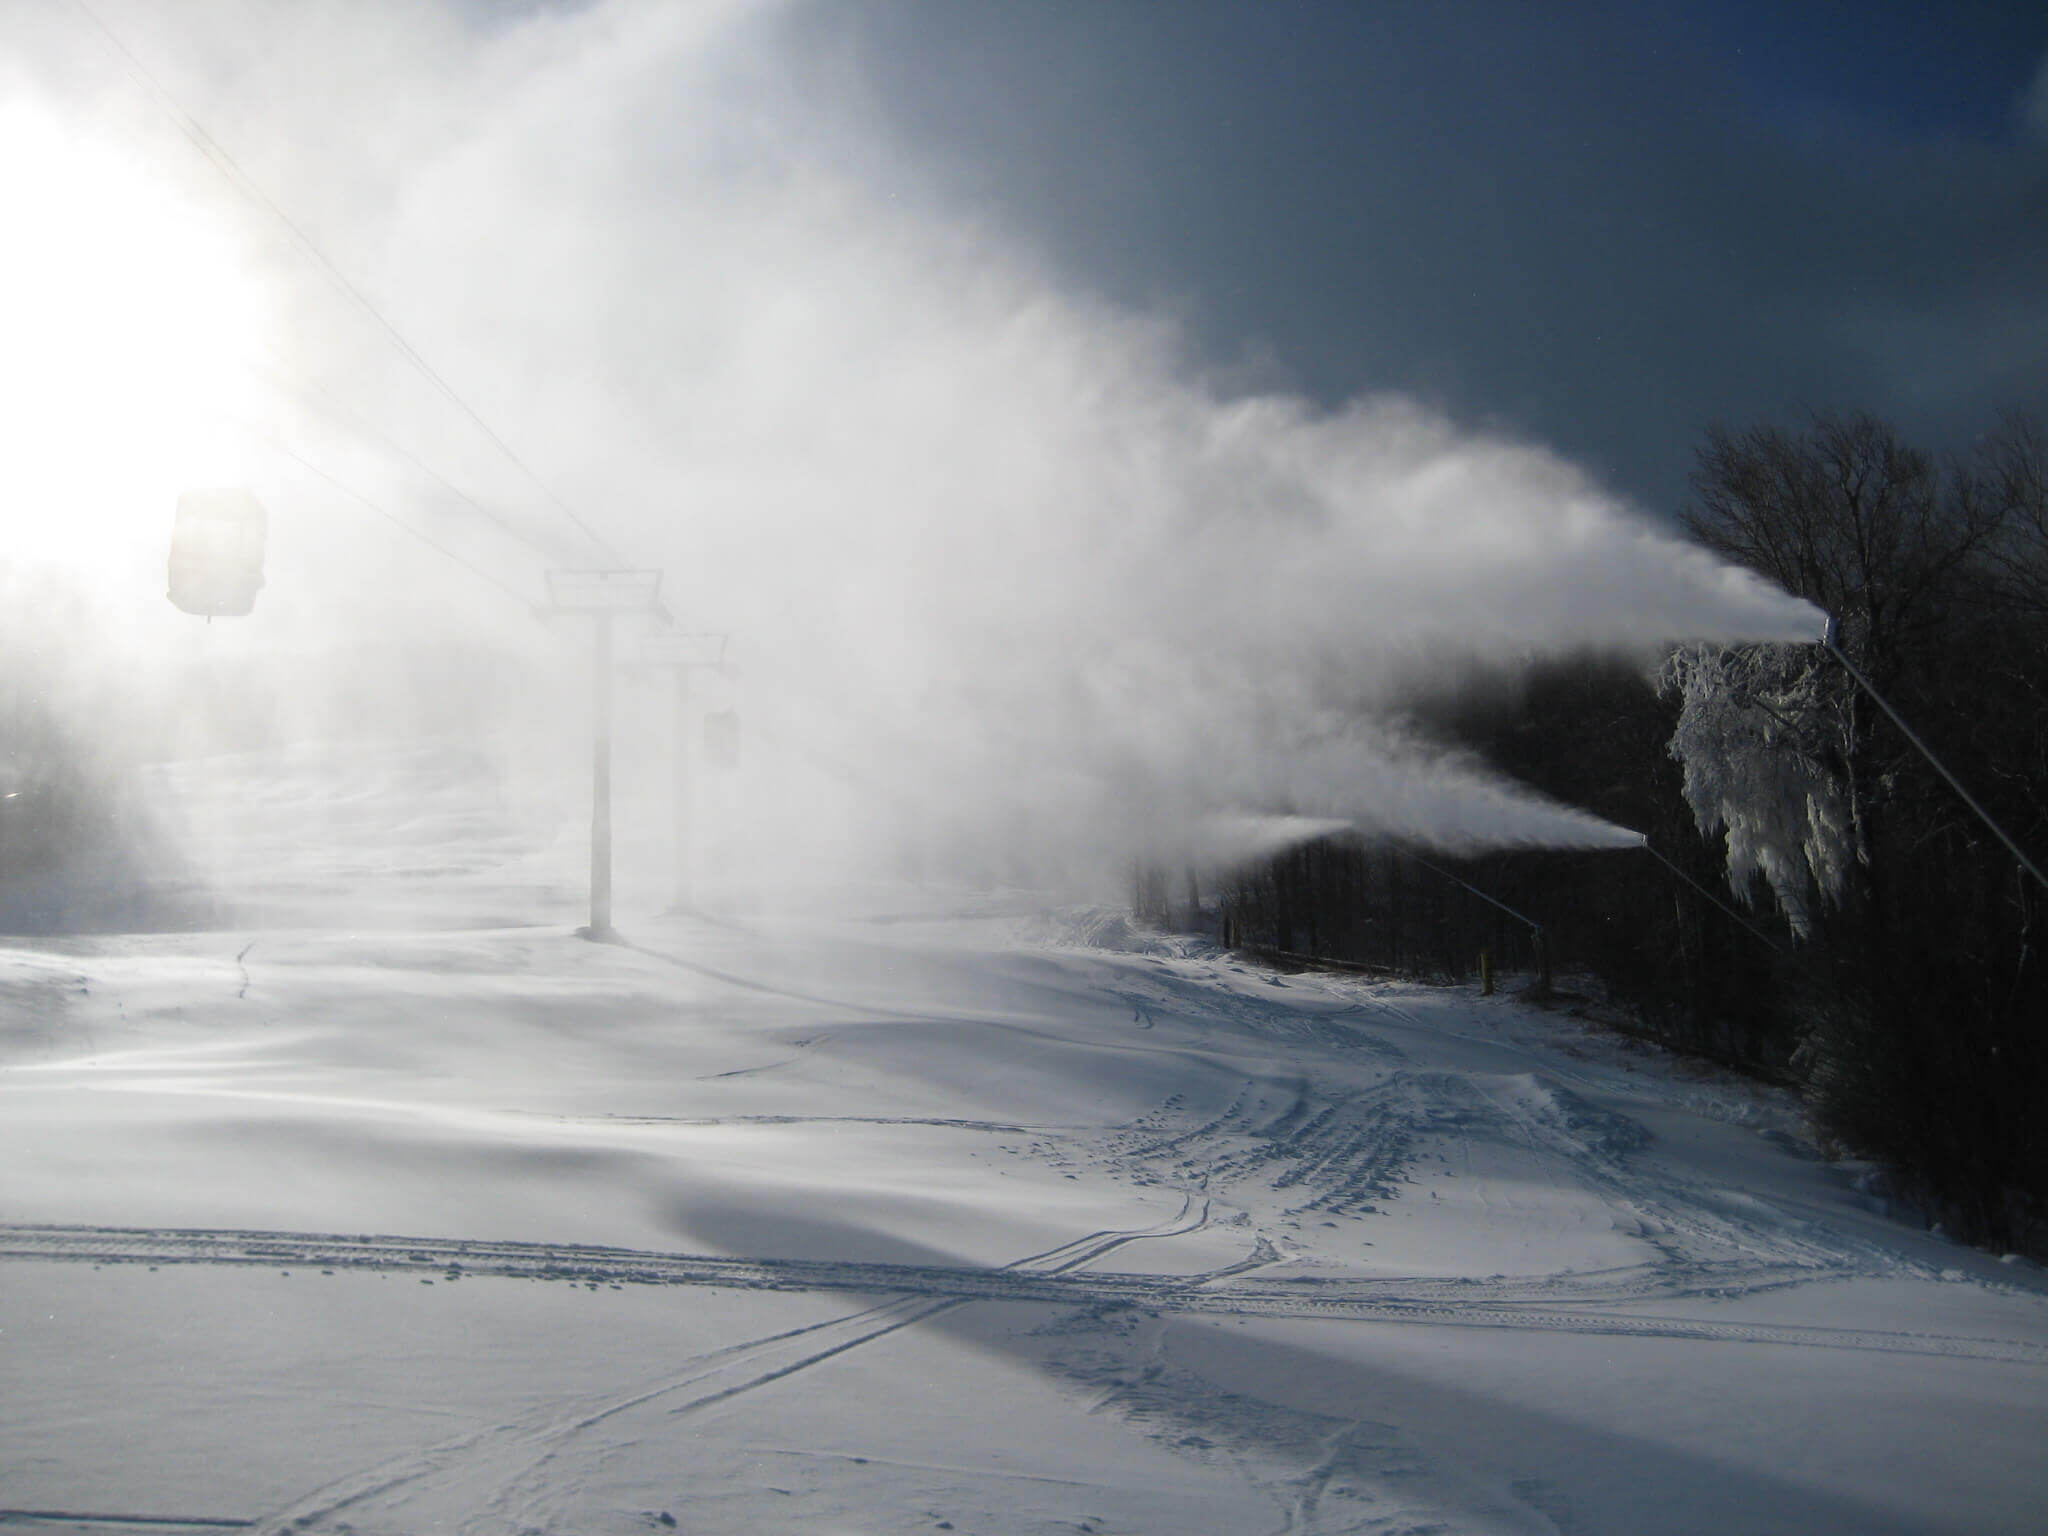 Ice usage in snowmaking